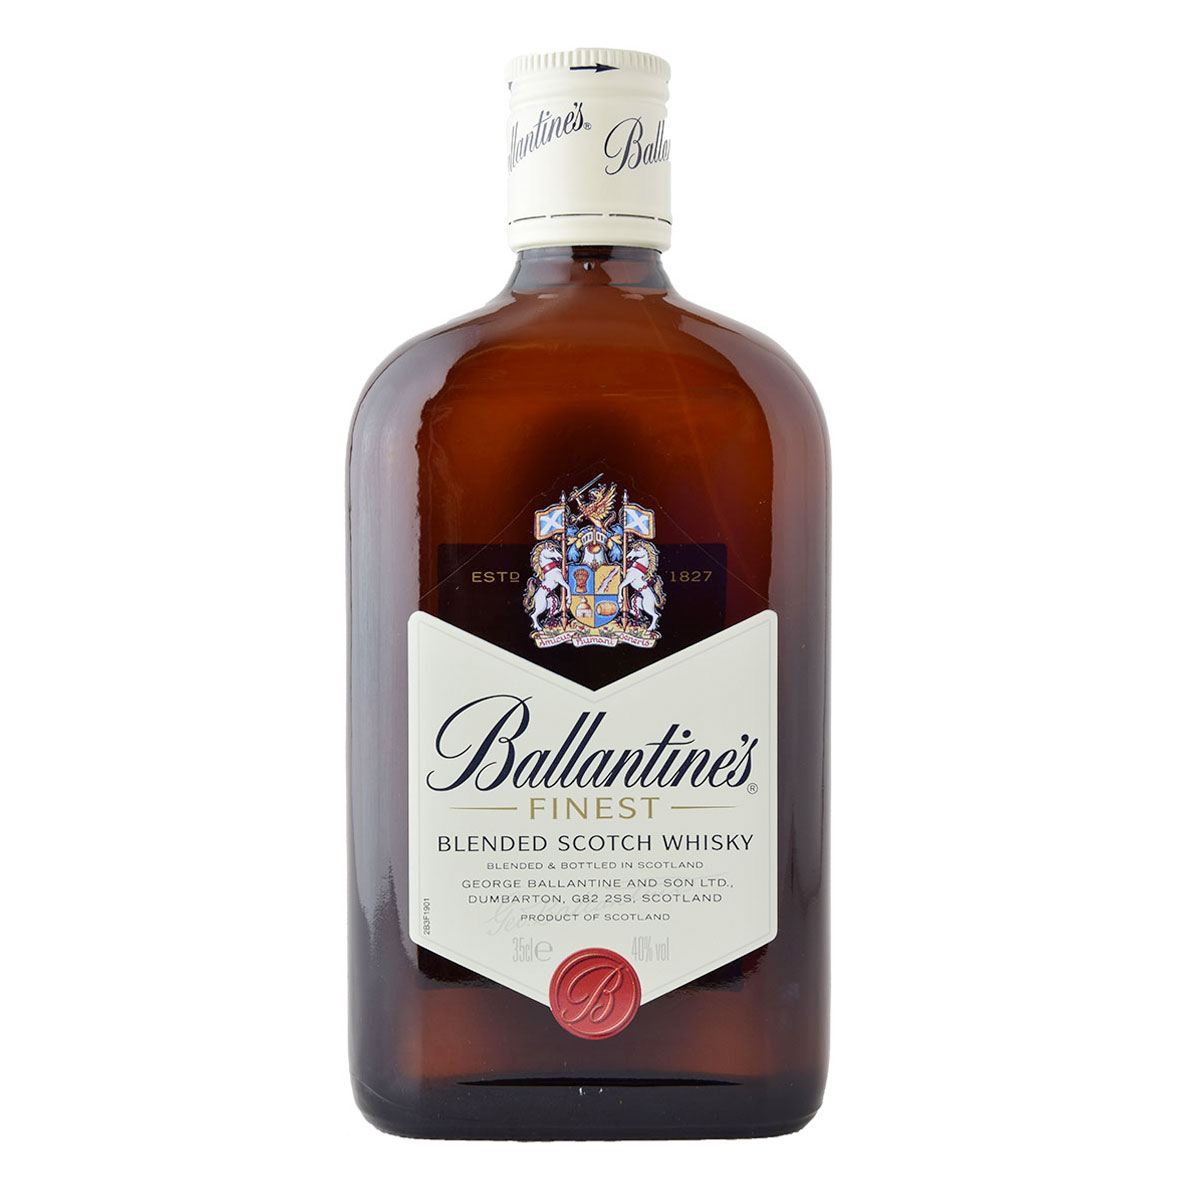 a bottle of ballantines finest whisky